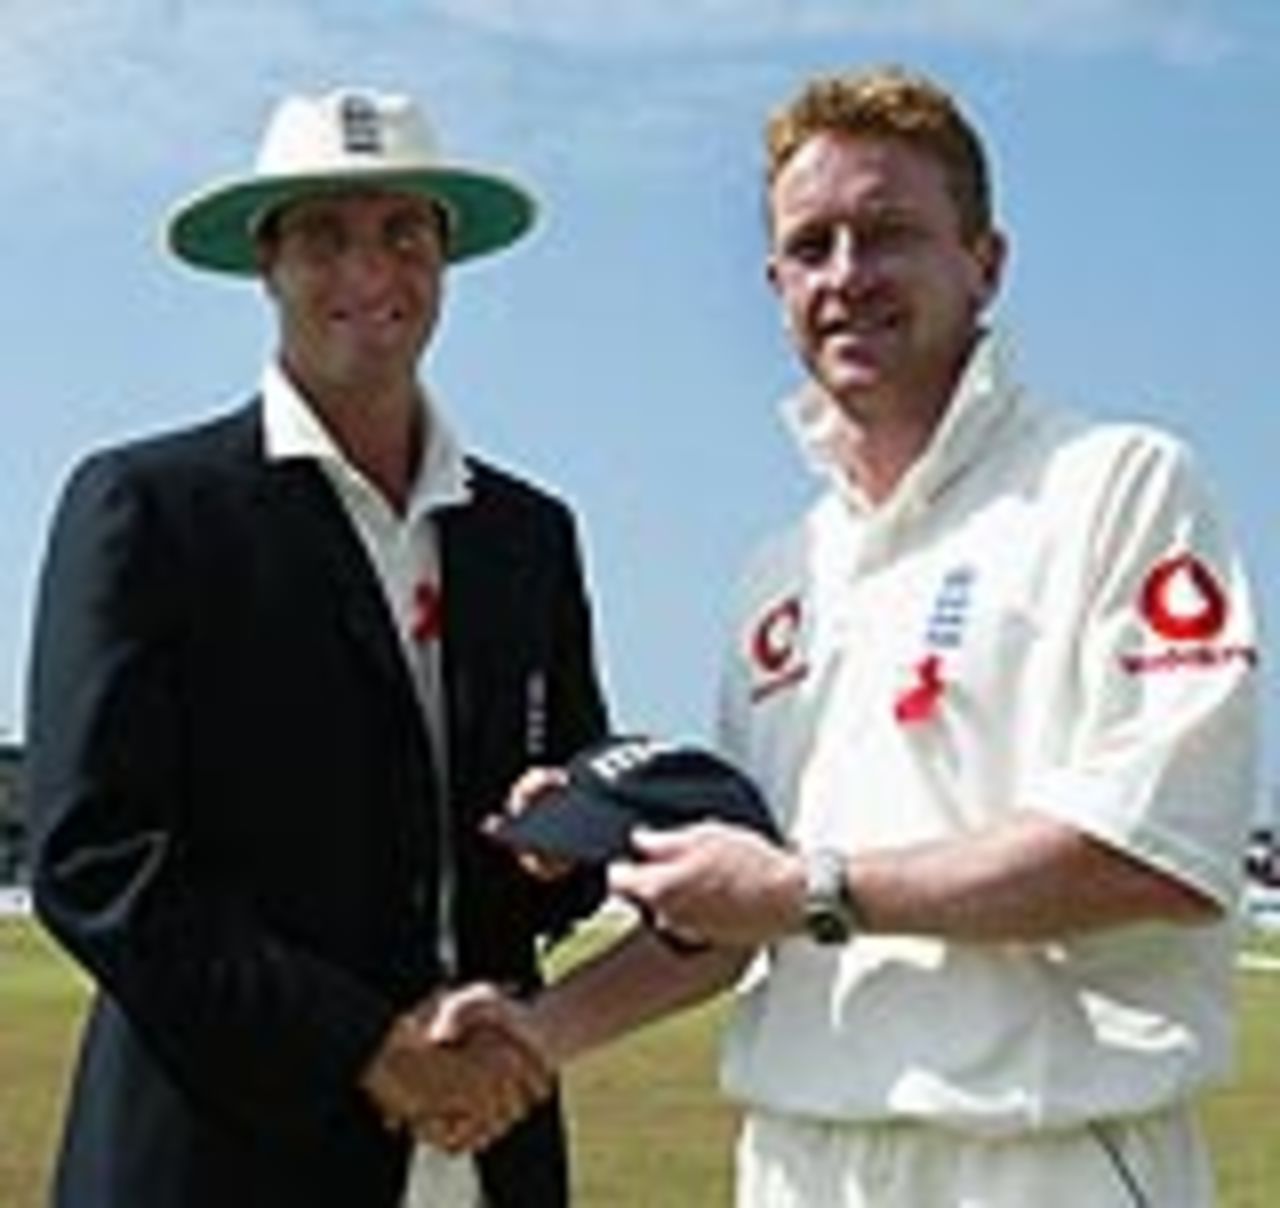 Paul Collingwood receives his England cap from Michael Vaughan